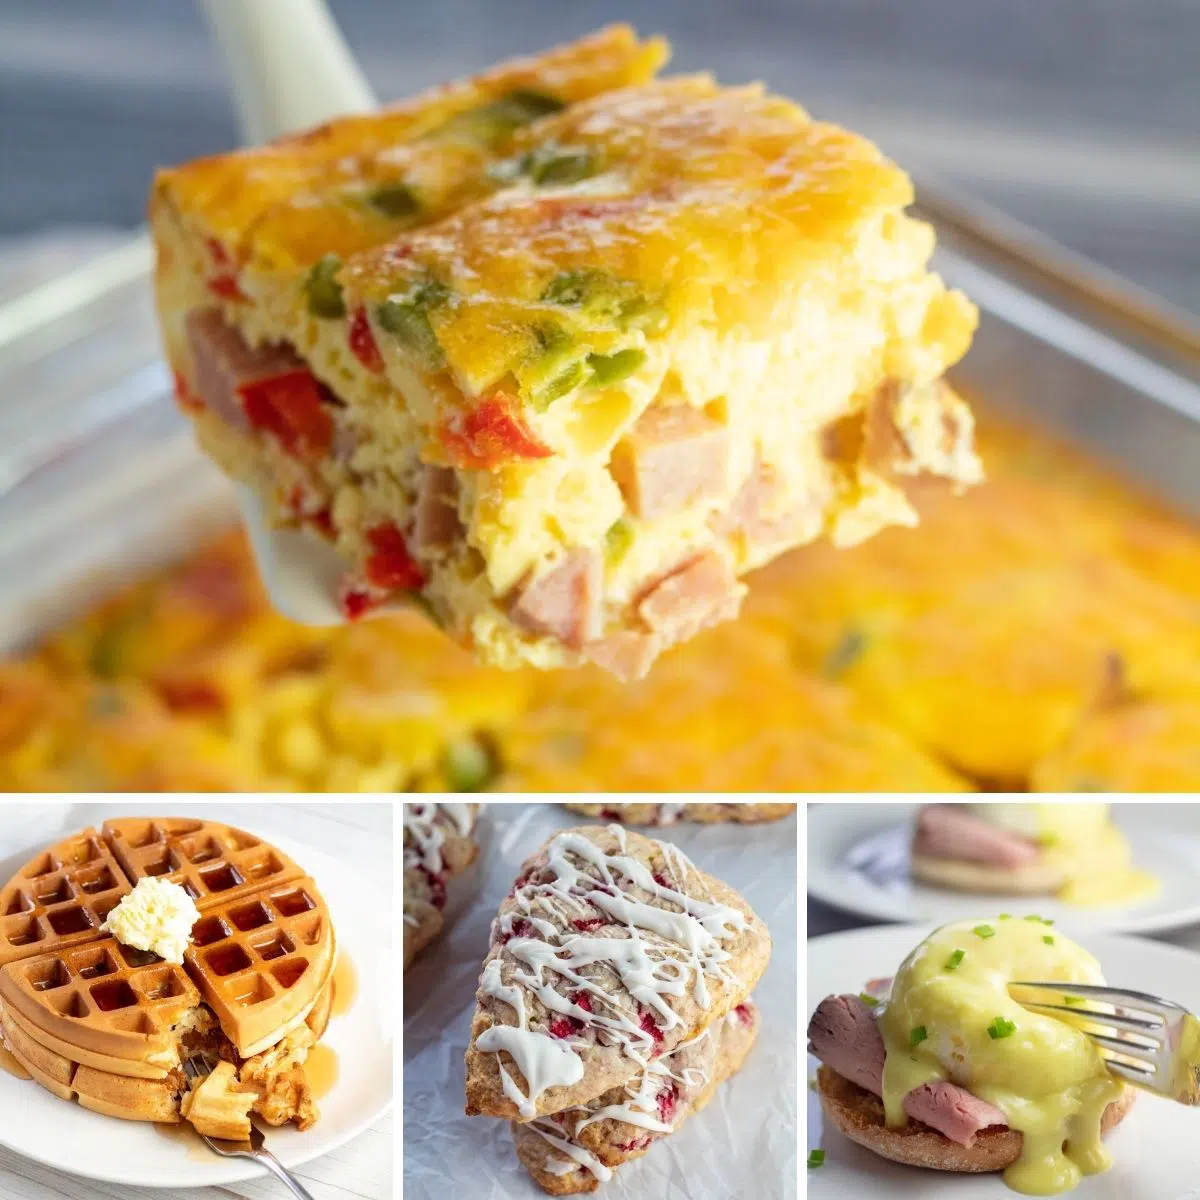 Best breakfast ideas for tasty recipes that will please the whole family any day of the week!